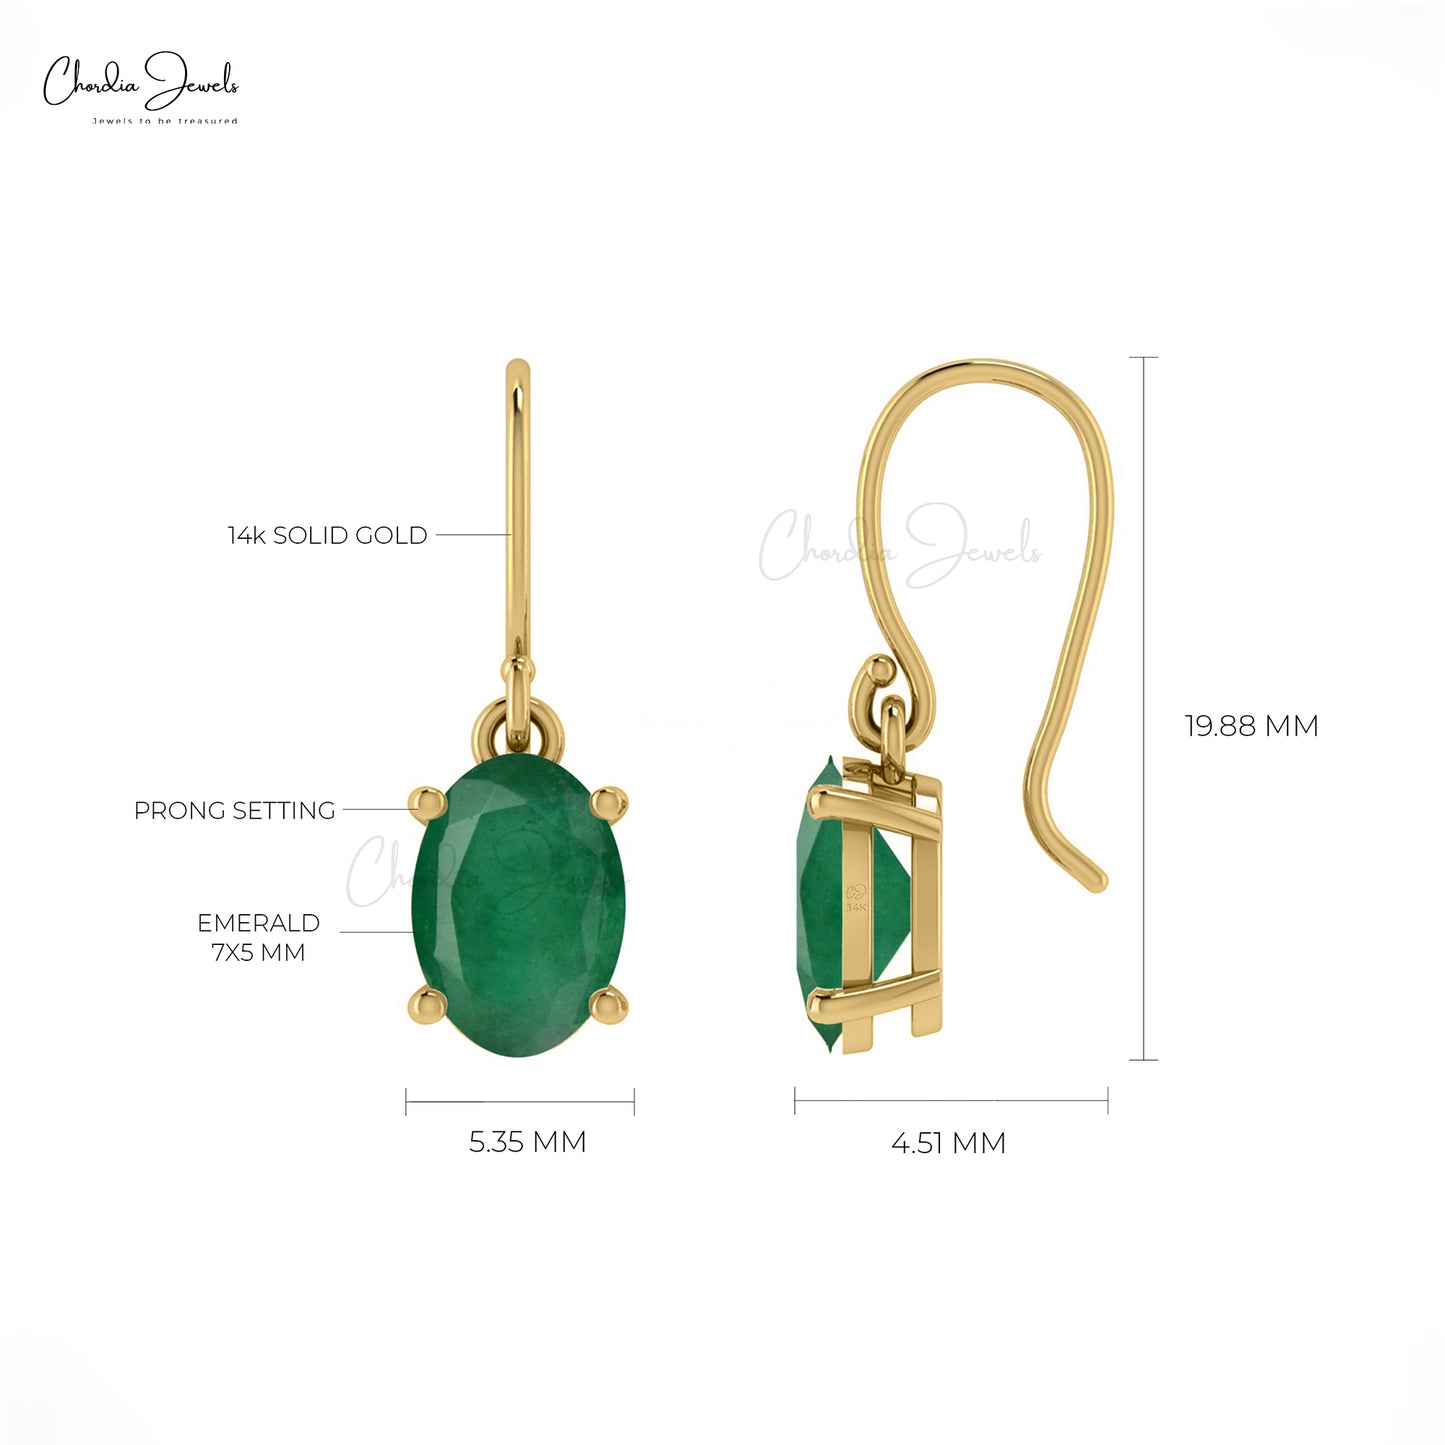 Load image into Gallery viewer, Natural Emerald Danglers Earrings 14k Real Gold Prong Set Fish Hook Earrings 7x5mm Oval Cut Gemstone Handmade Jewelry For Wedding Gift
